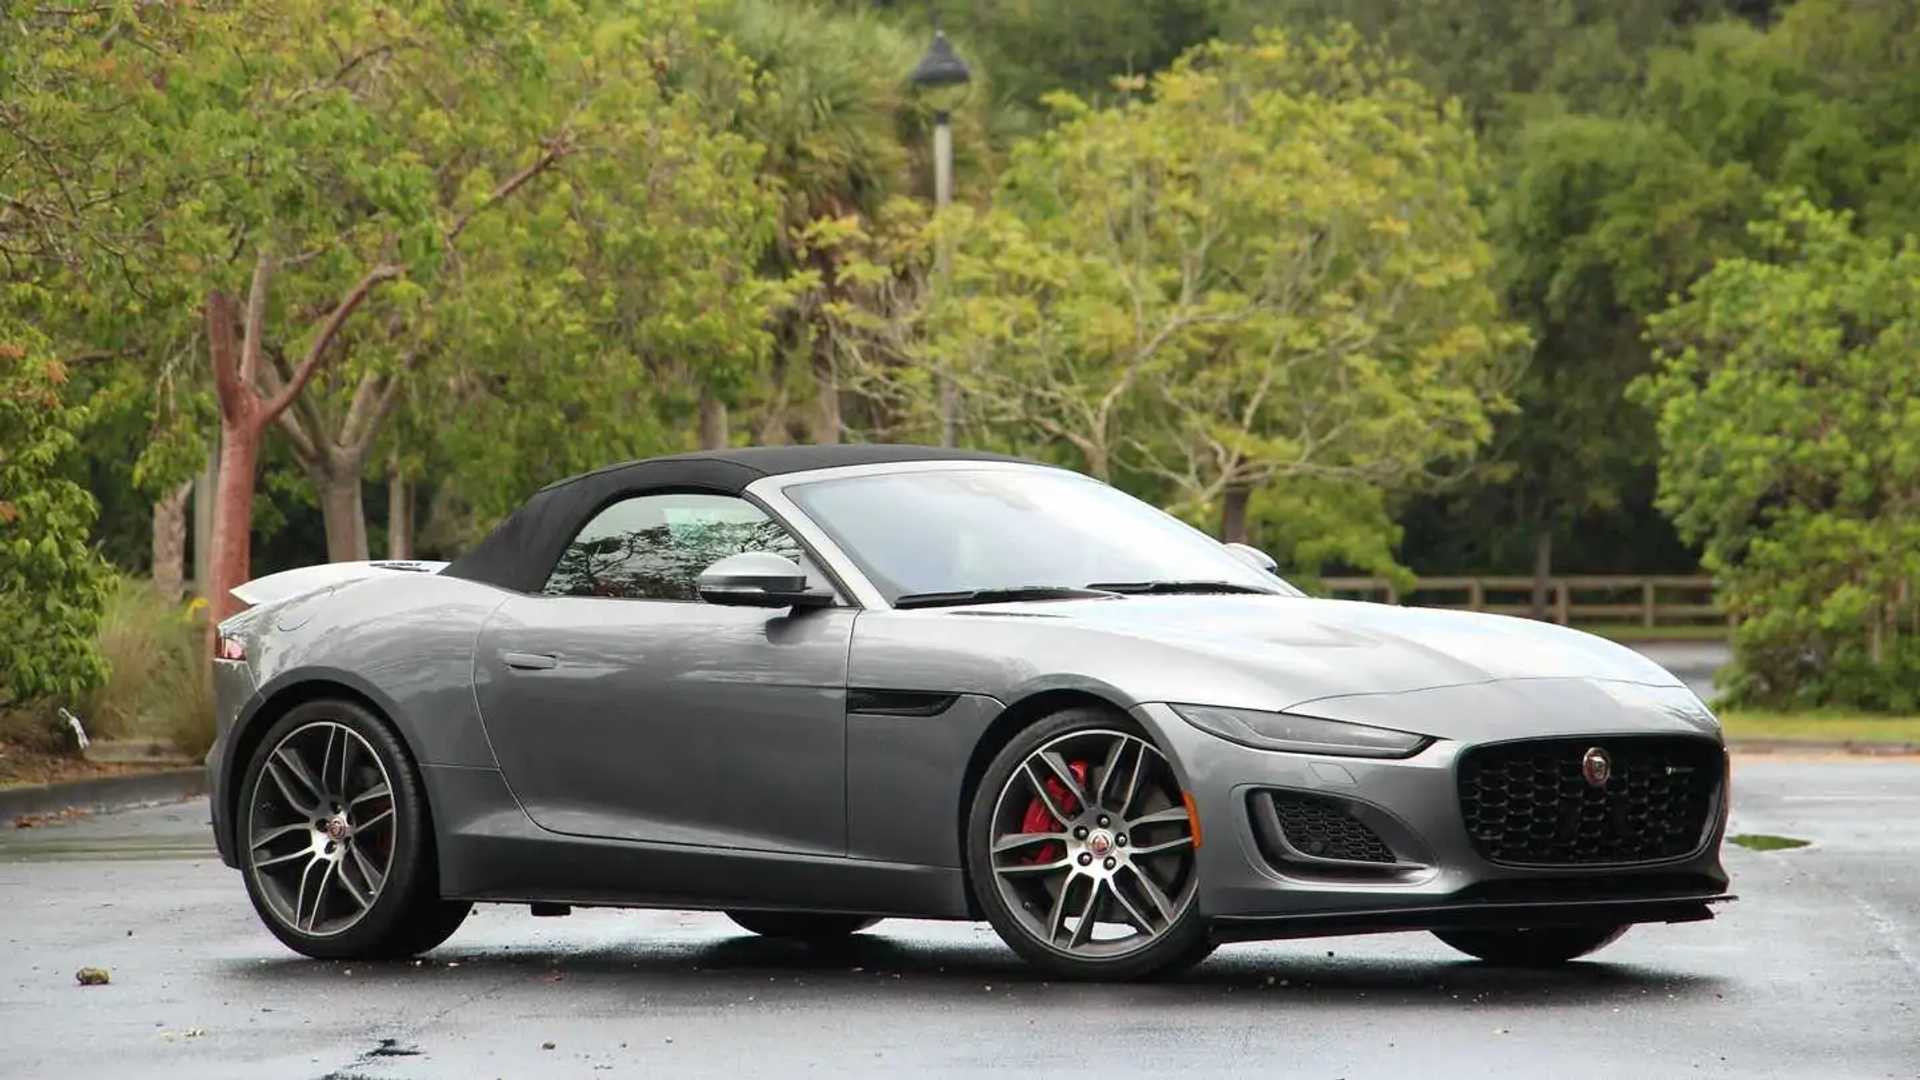 2021 Jaguar F-Type P380 Convertible Review: Losing Grace With Age